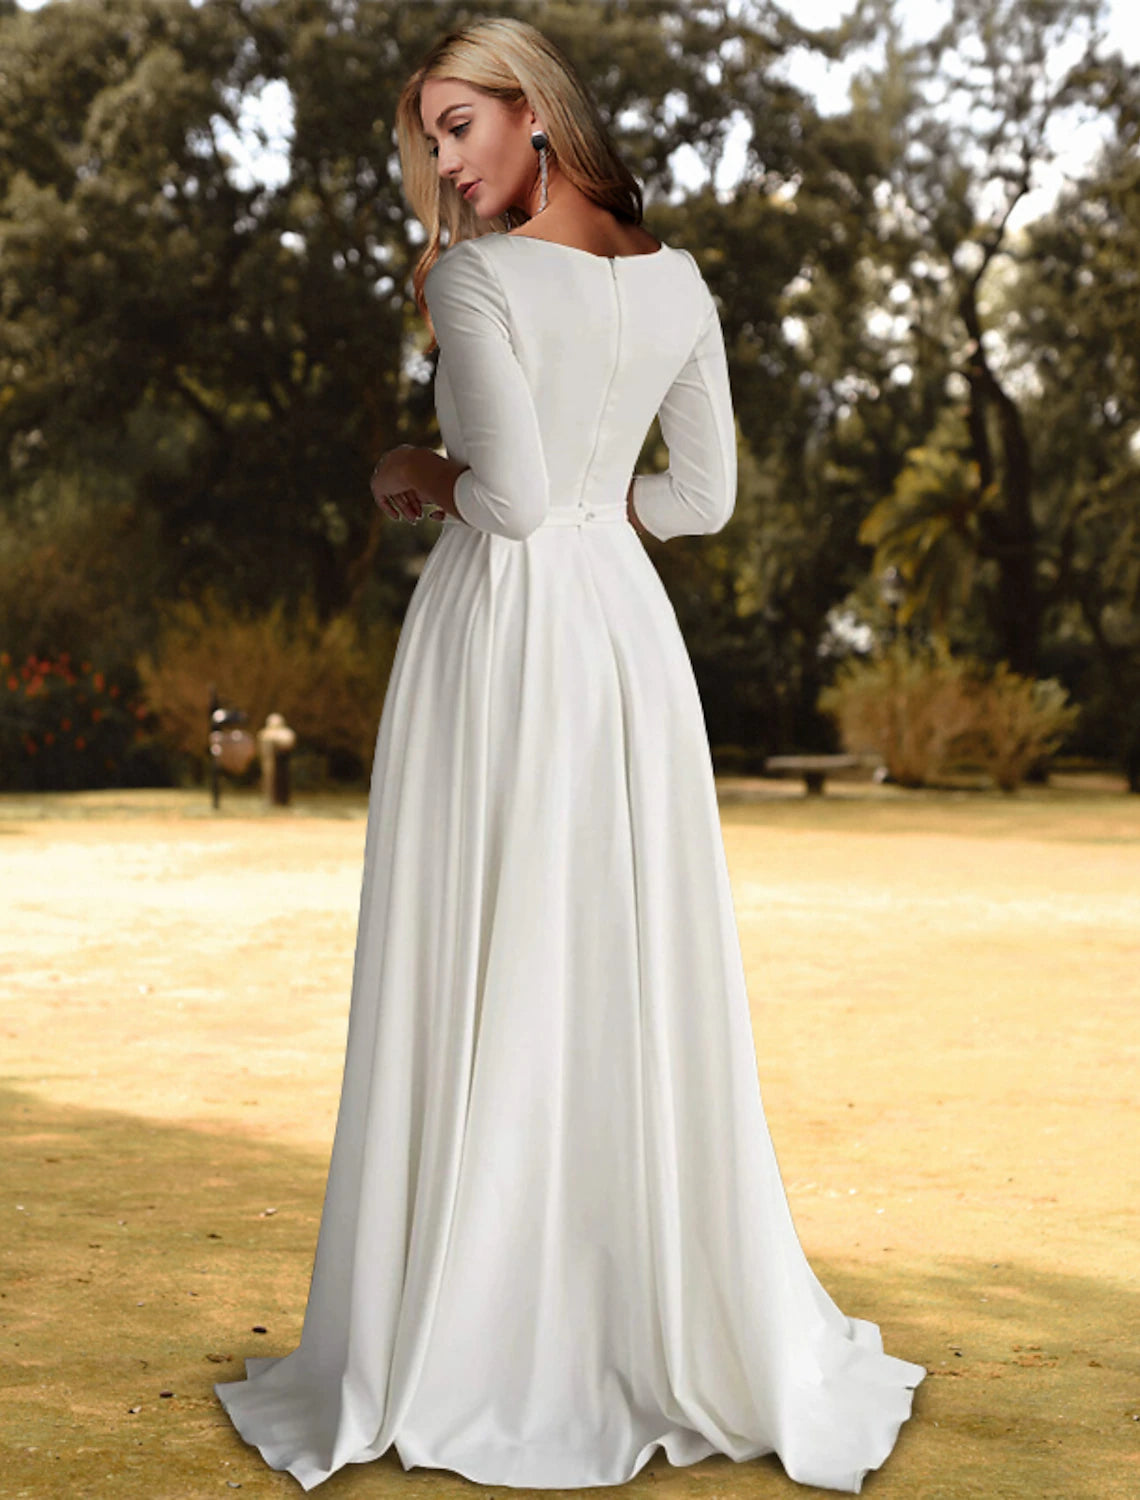 Hall Casual Wedding Dresses A-Line Scoop Neck 3/4 Length Sleeve Sweep / Brush Train Stretch Fabric Bridal Gowns With Pleats Solid Color